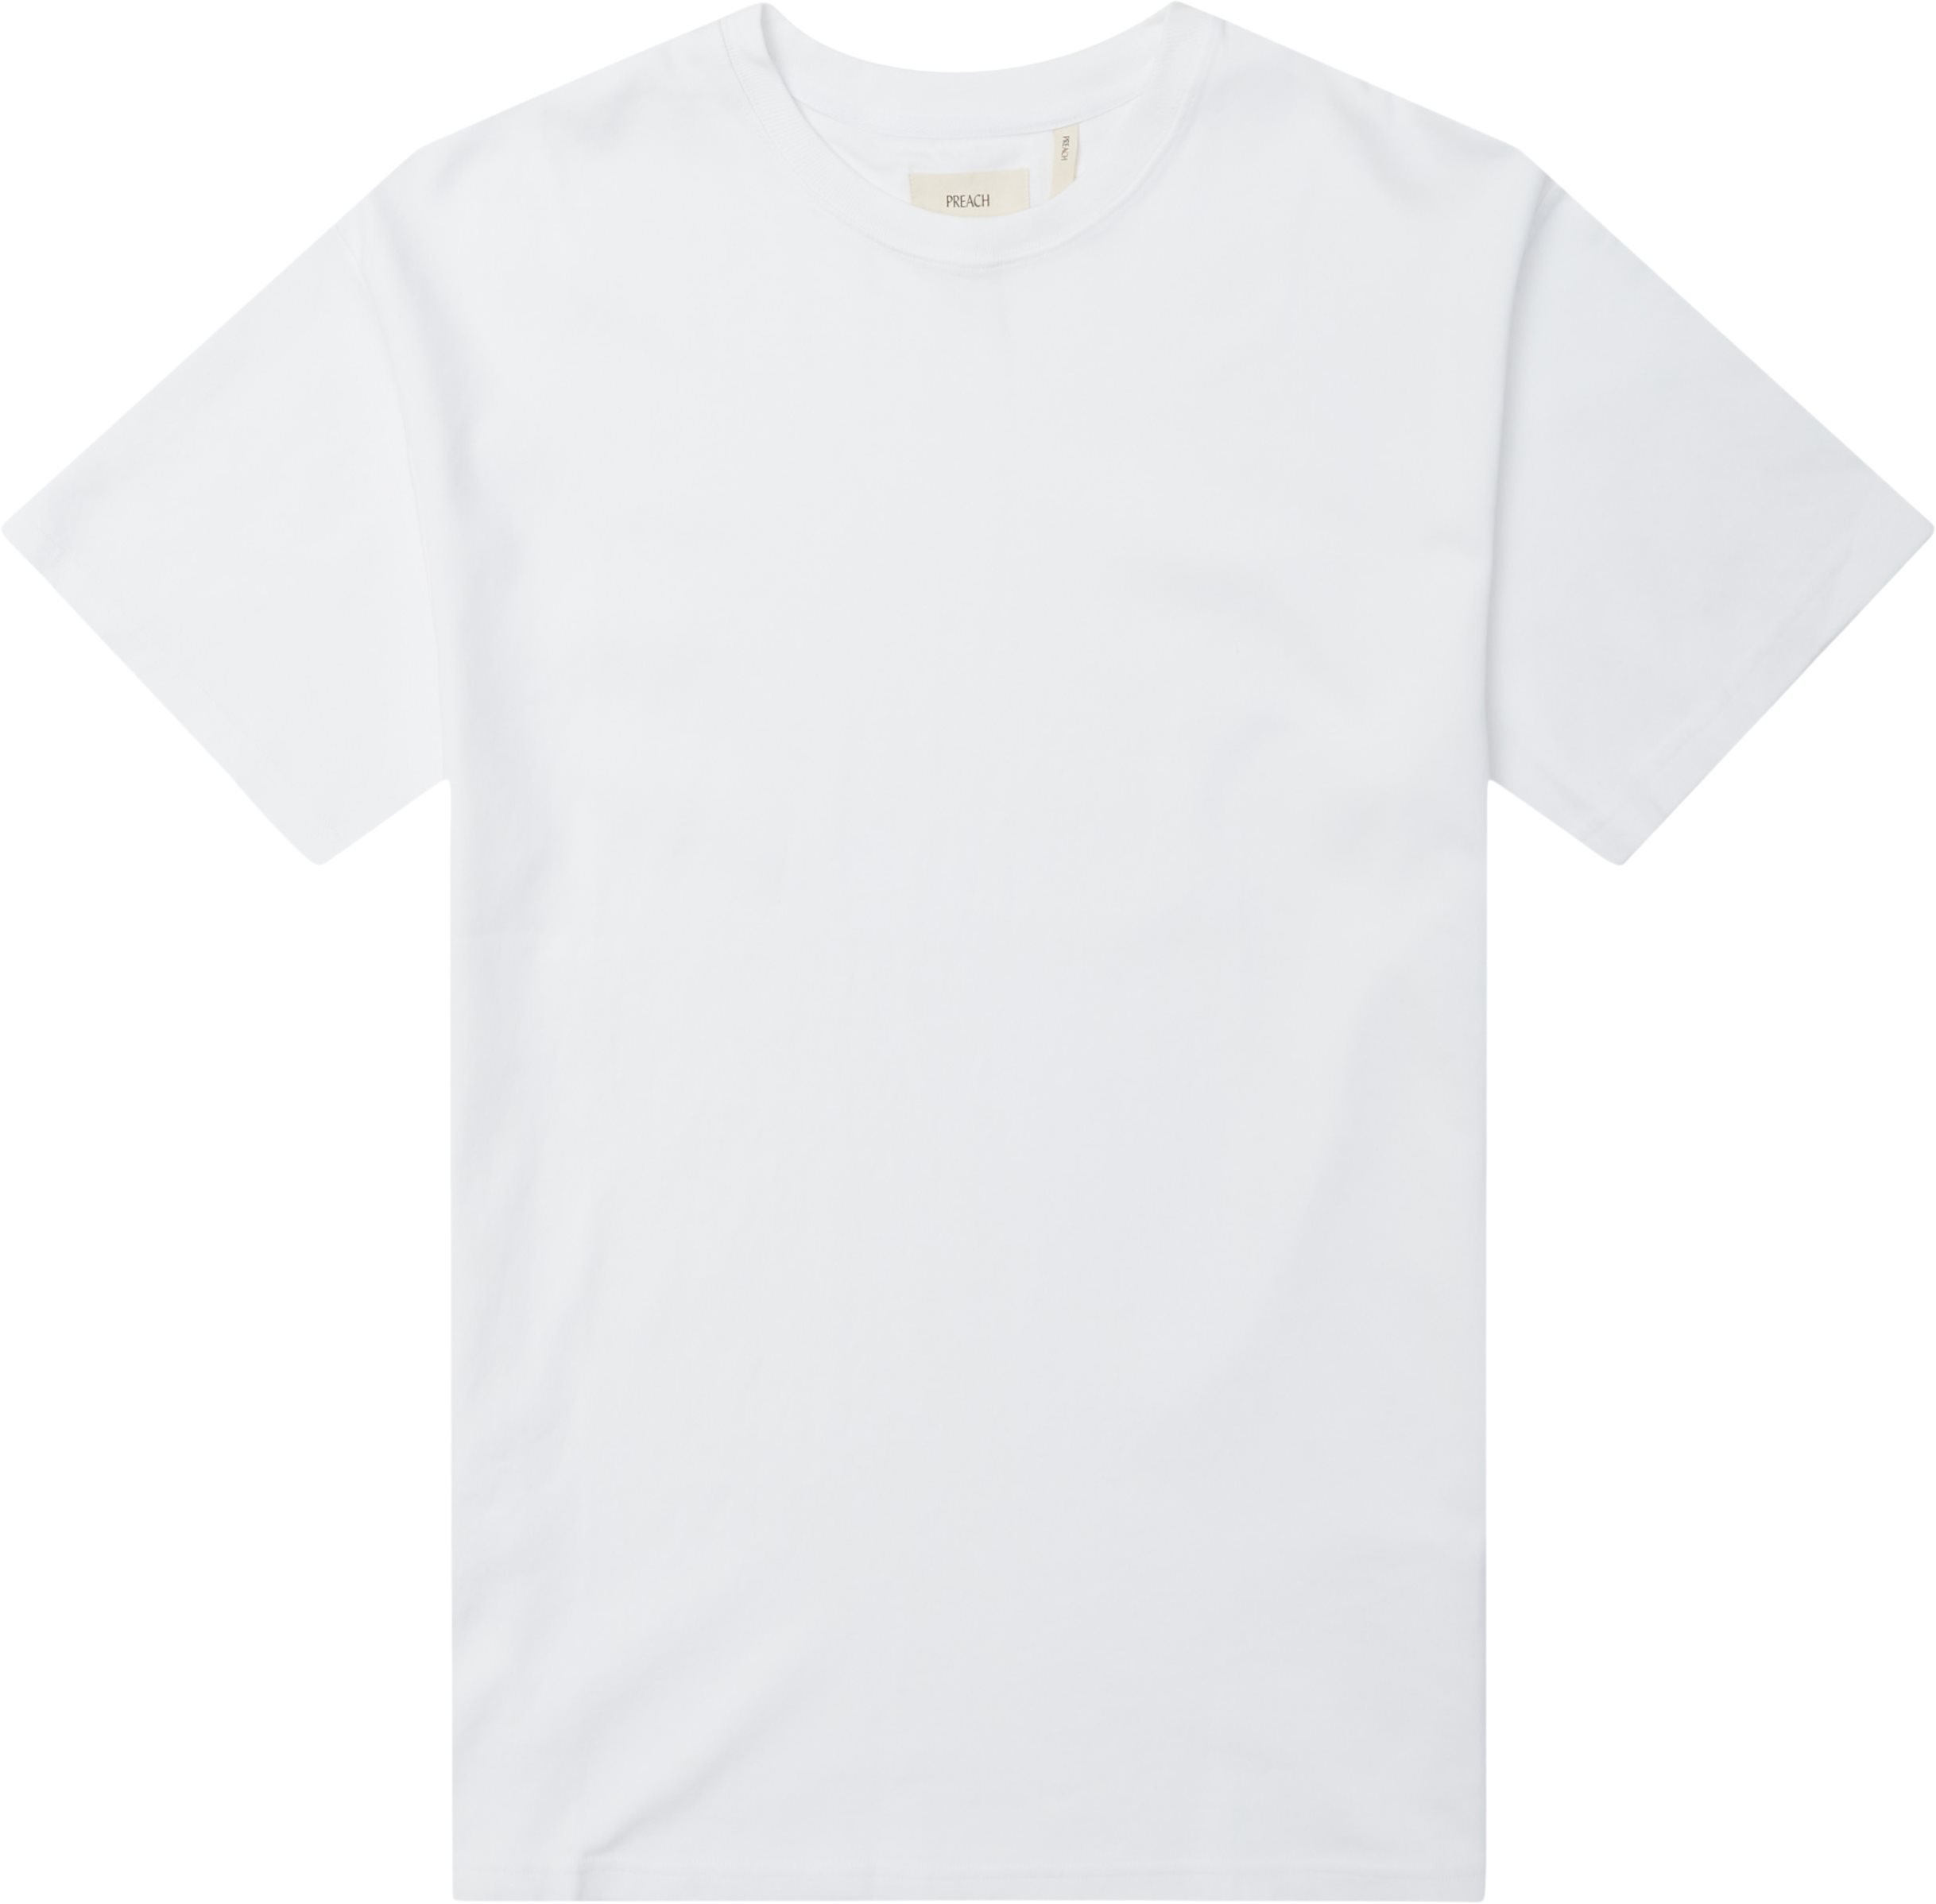 Heavy Tee - T-shirts - Oversize fit - White